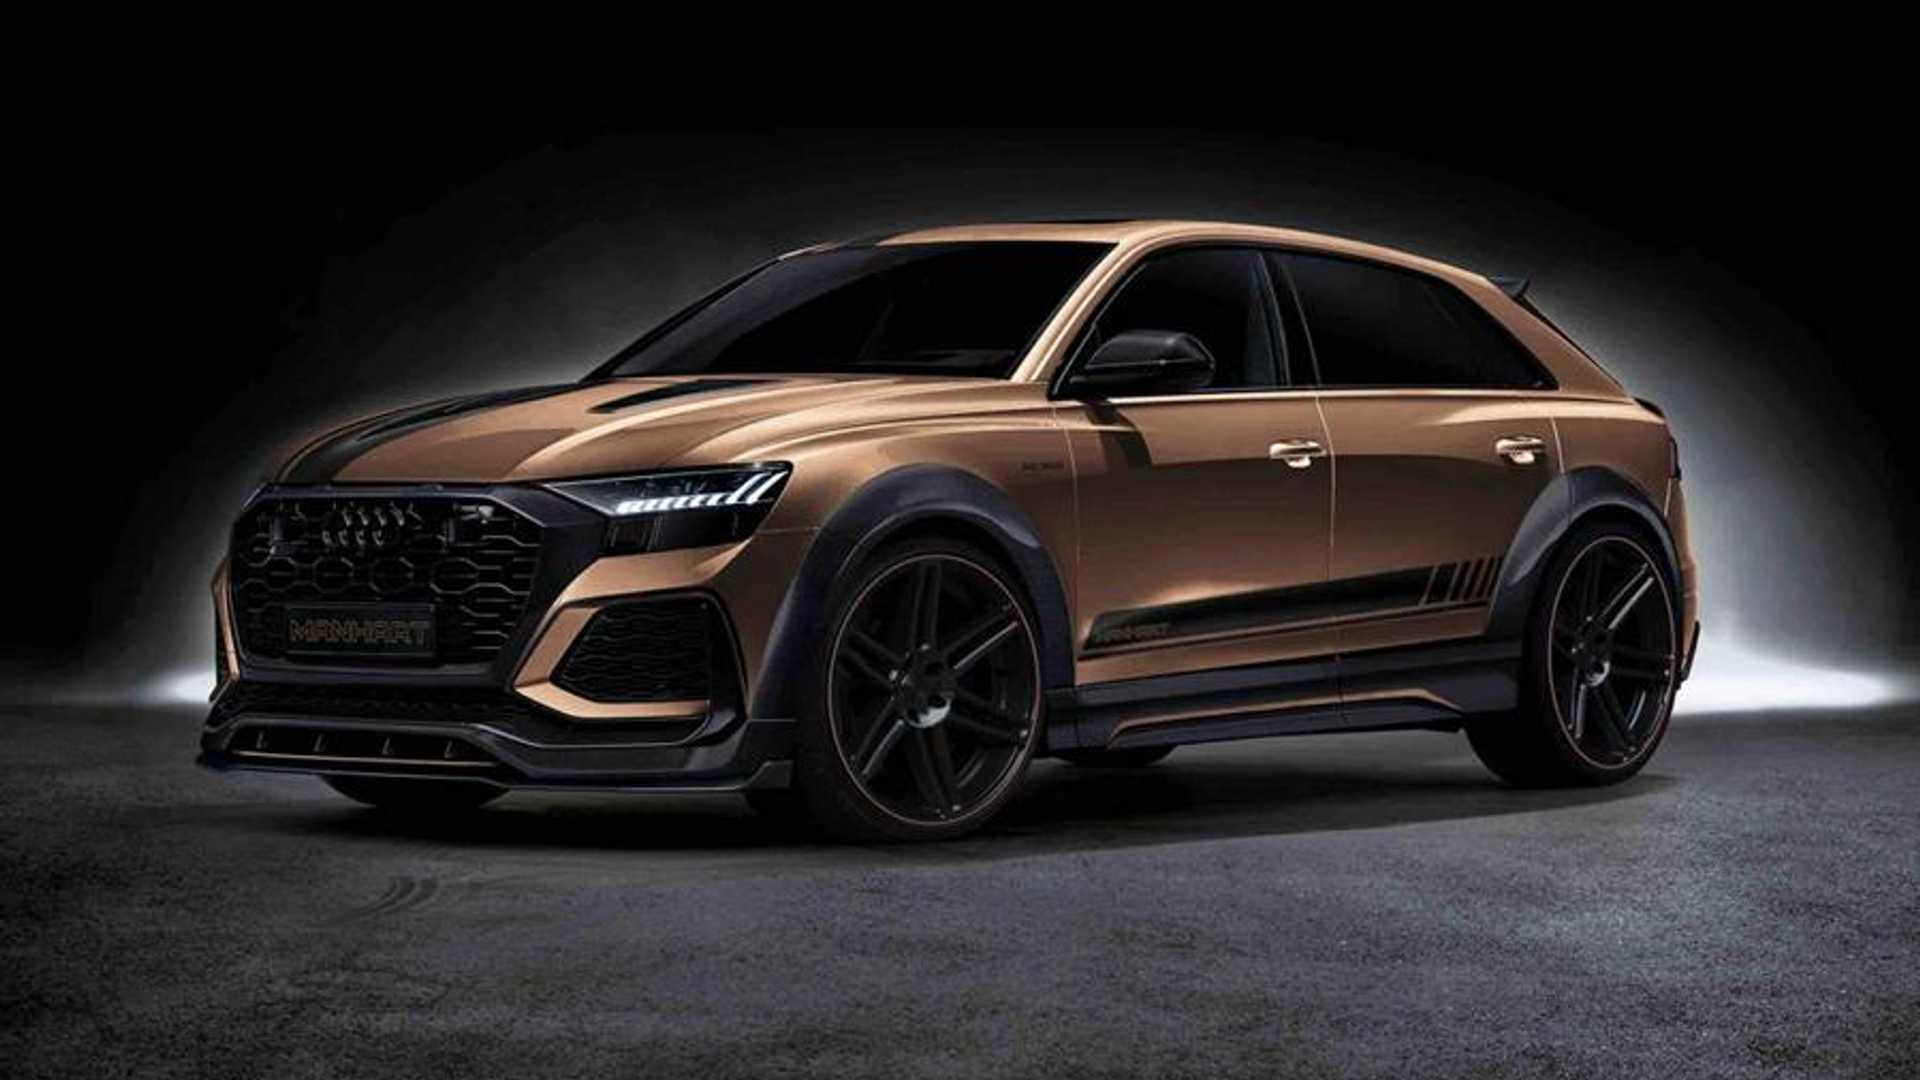 Audi RS Q8 Gets Aggressive Design And Nearly 900 HP From Manhart